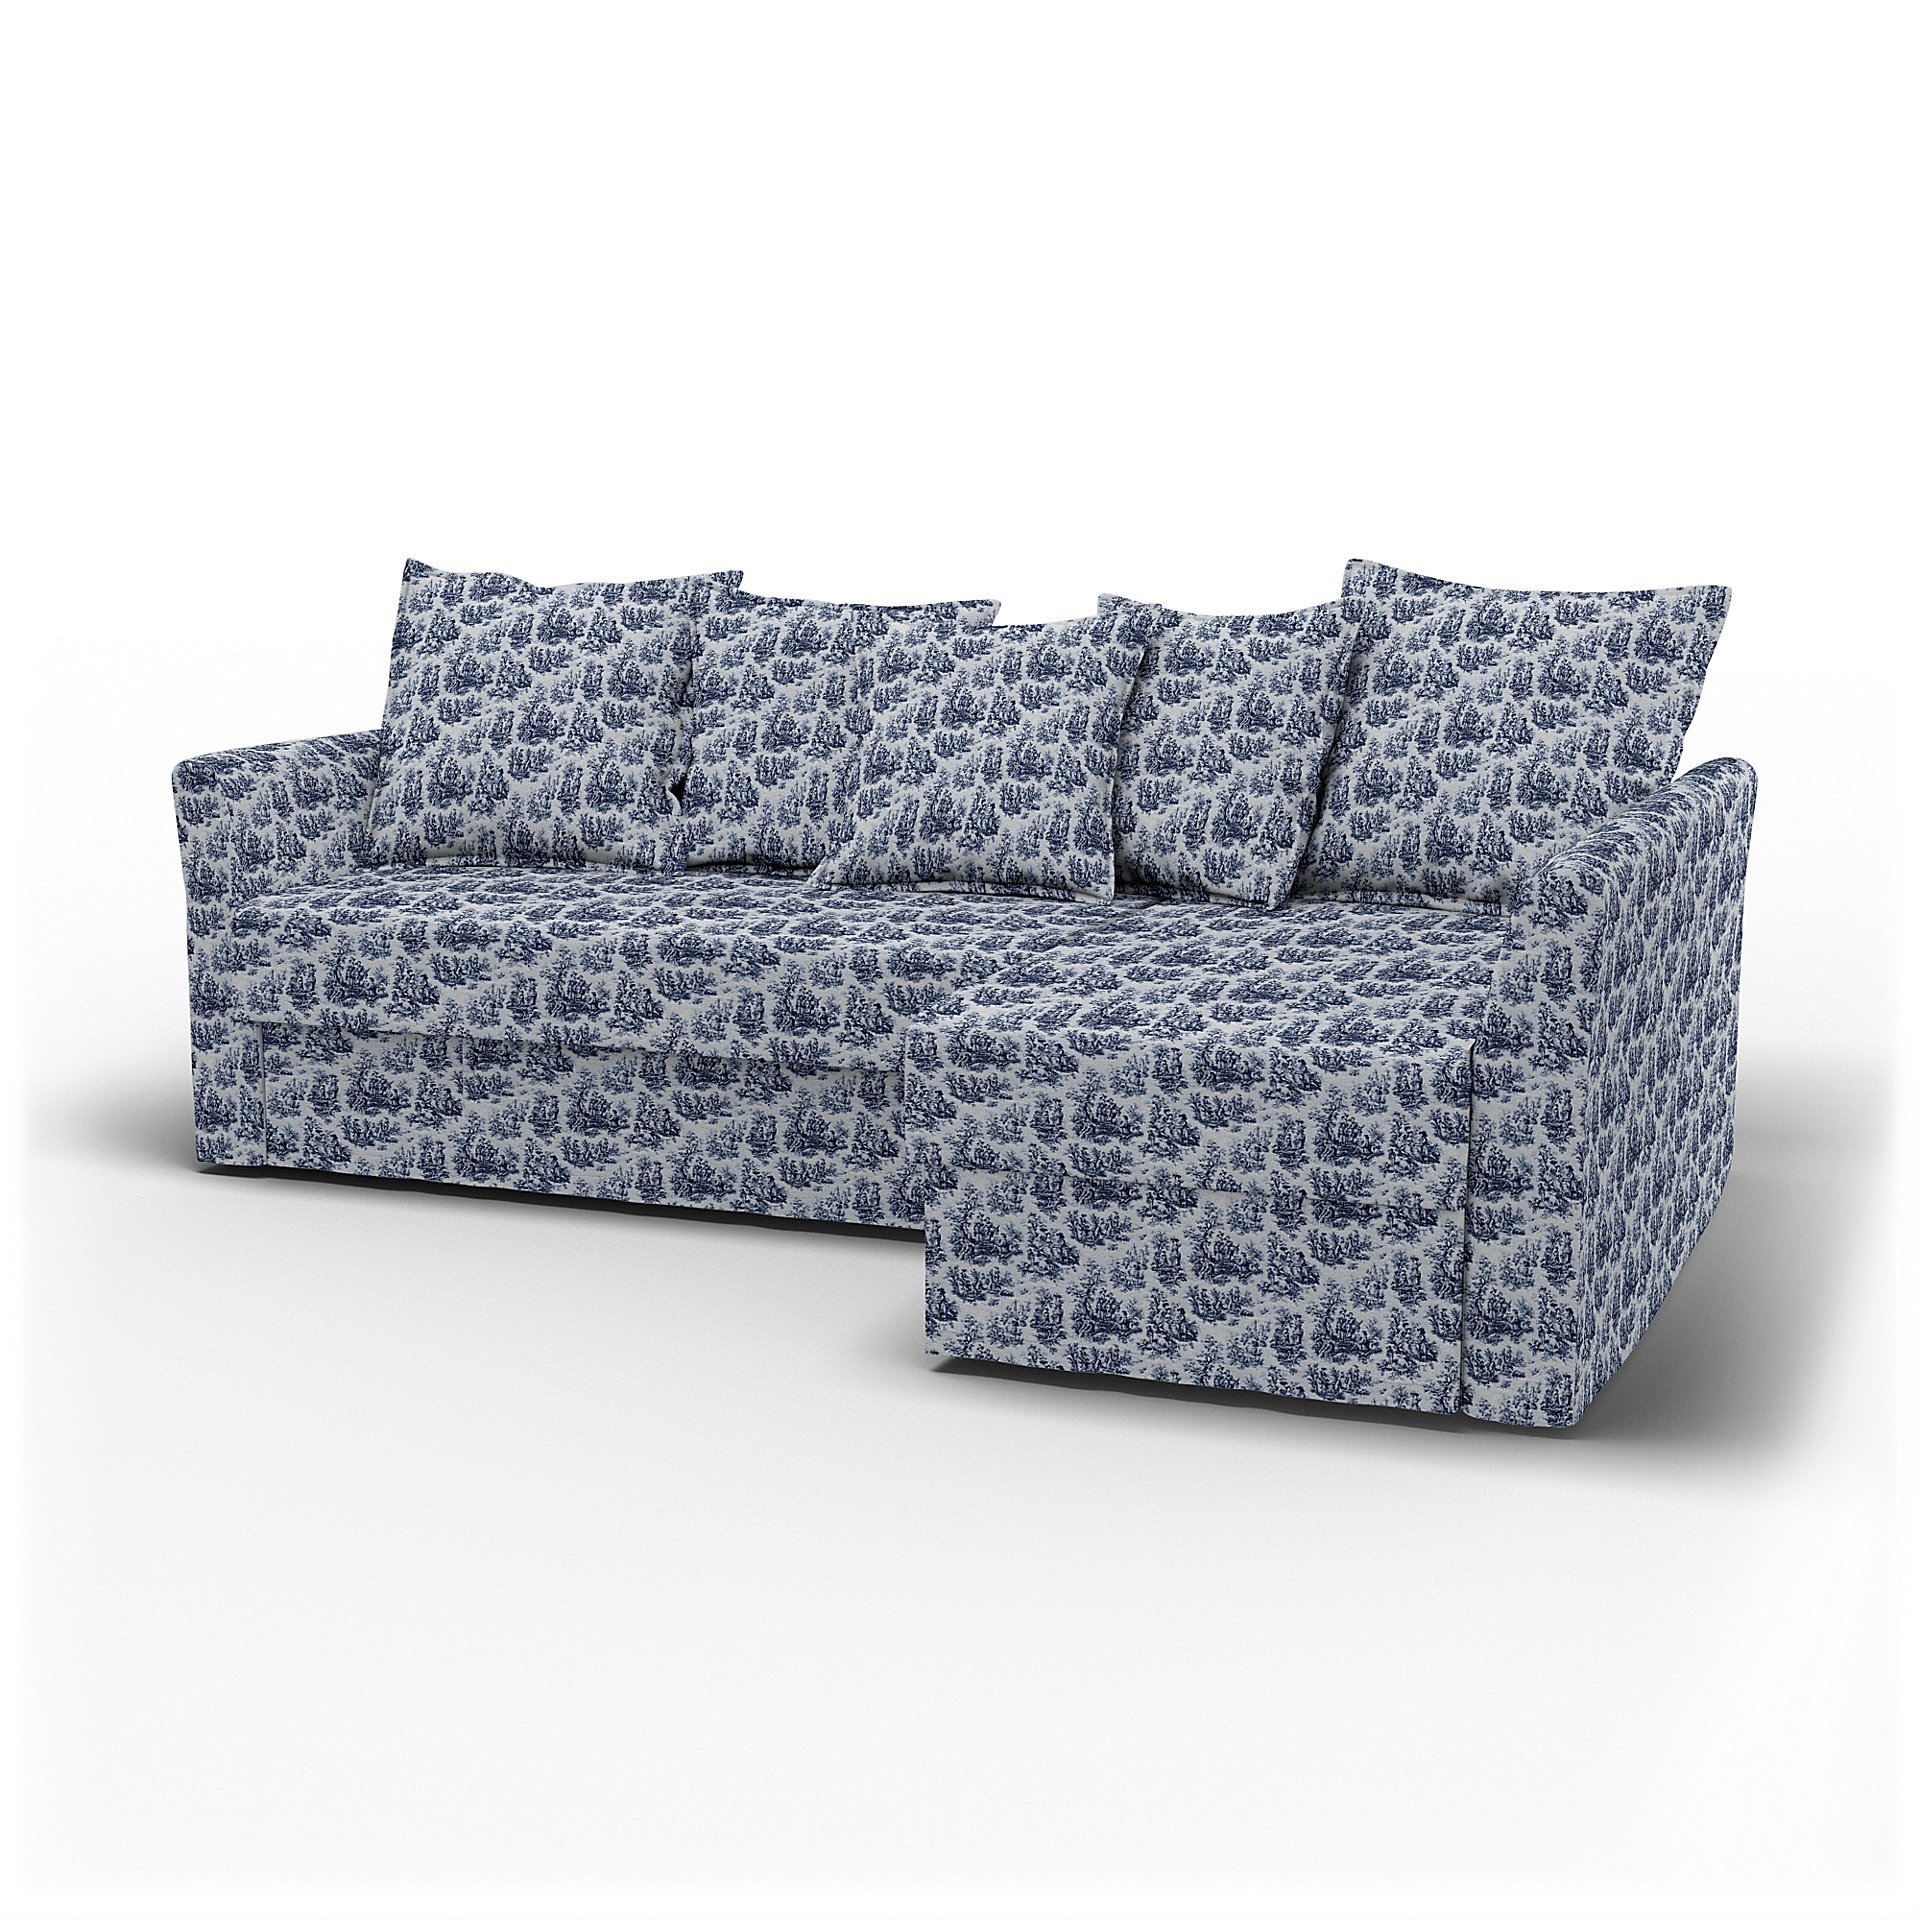 IKEA - Holmsund Sofabed with Chaiselongue, Dark Blue, Boucle & Texture - Bemz